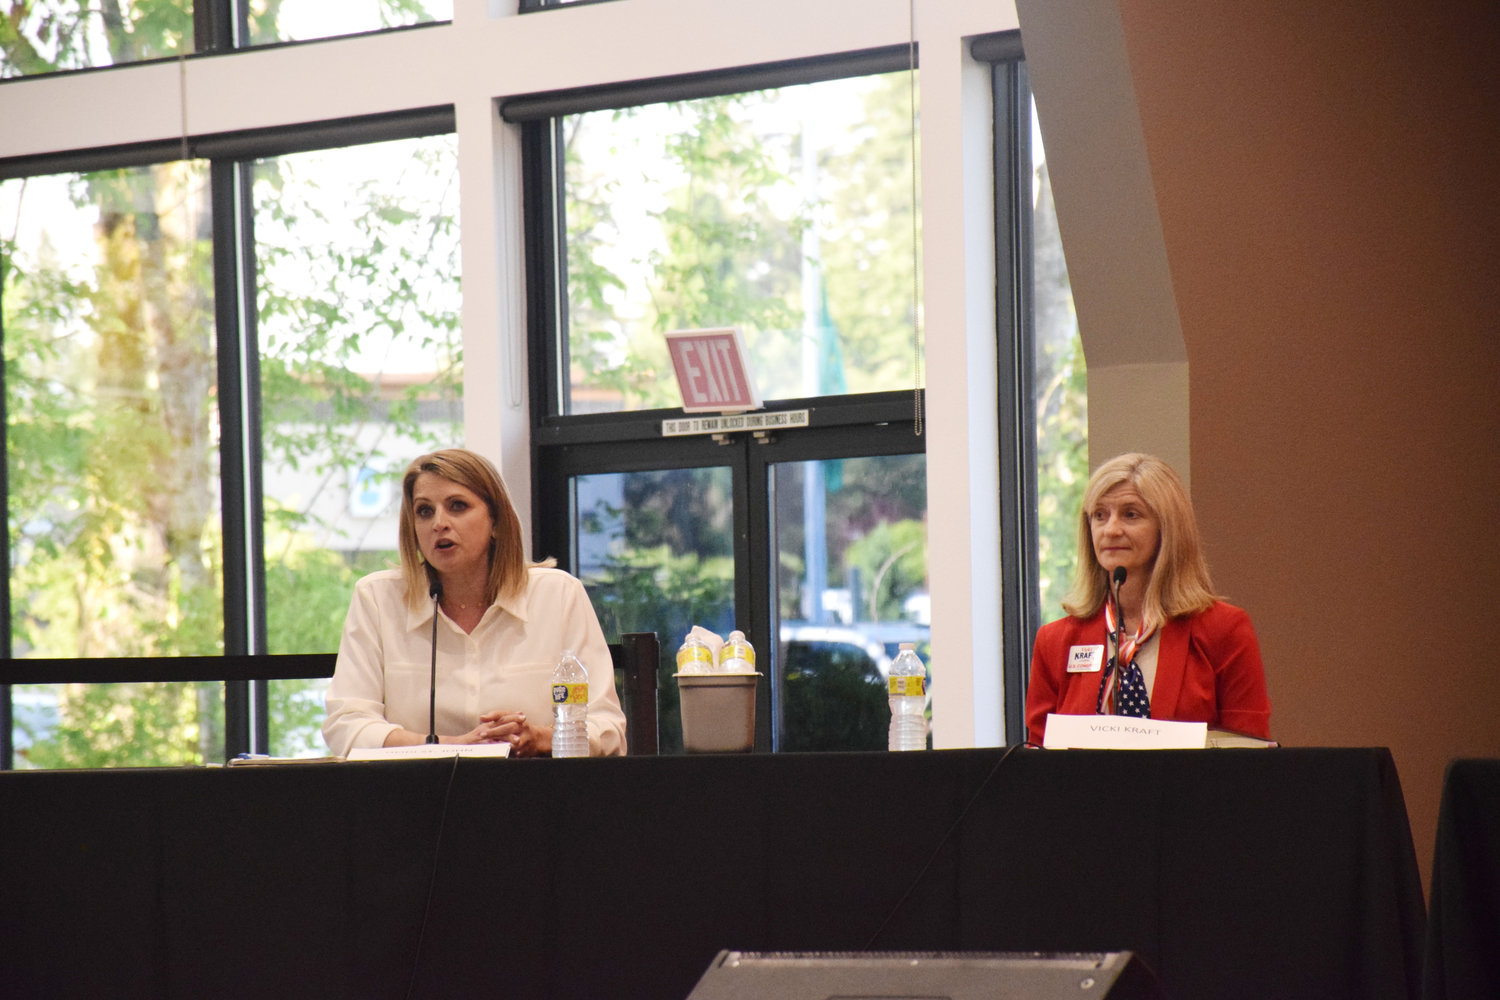 Washington state Third Congressional District candidate Heidi St. John, left, and Vicki Kraft  take part in a forum at RV Inn Style Resorts event hall in Hazel Dell May 31.